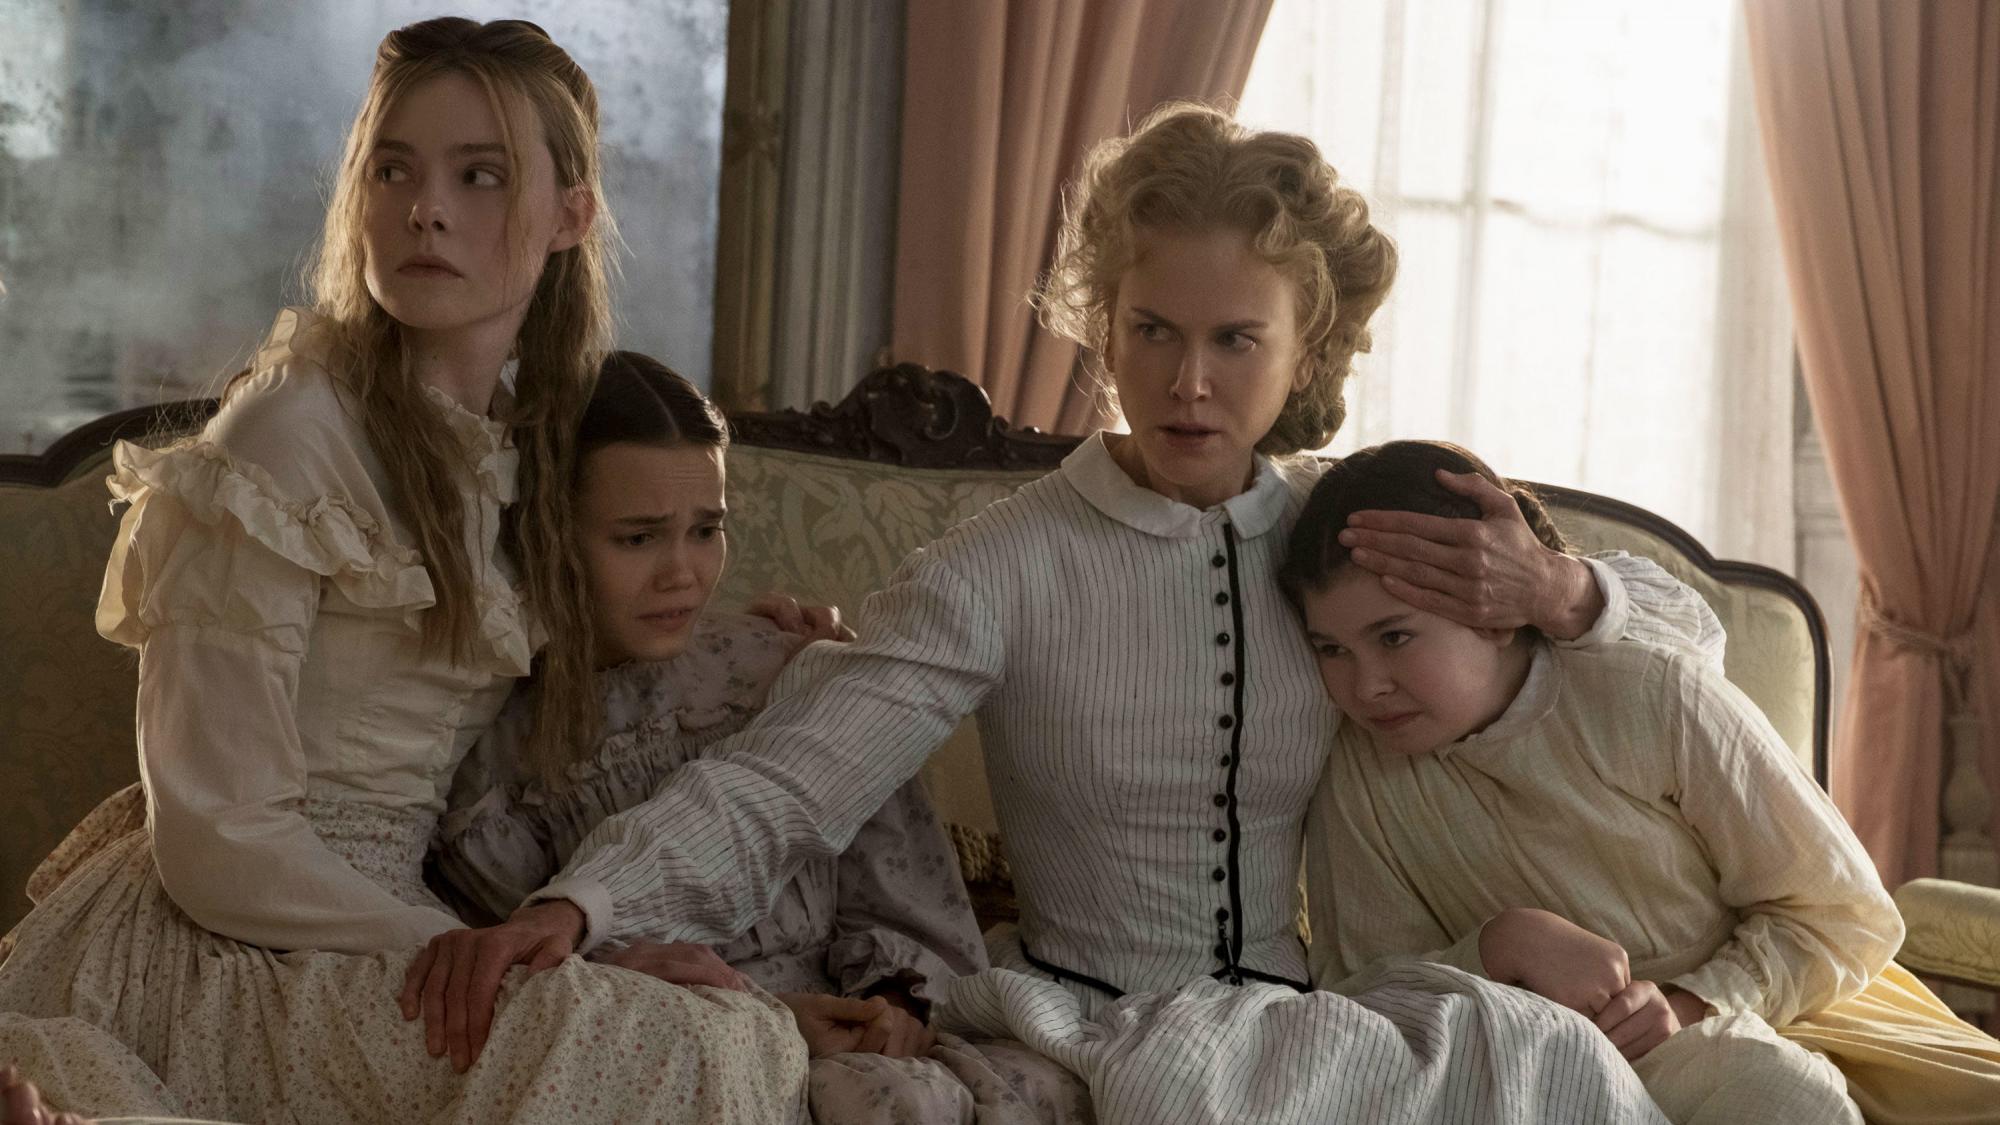 Backdrop Image for The Beguiled